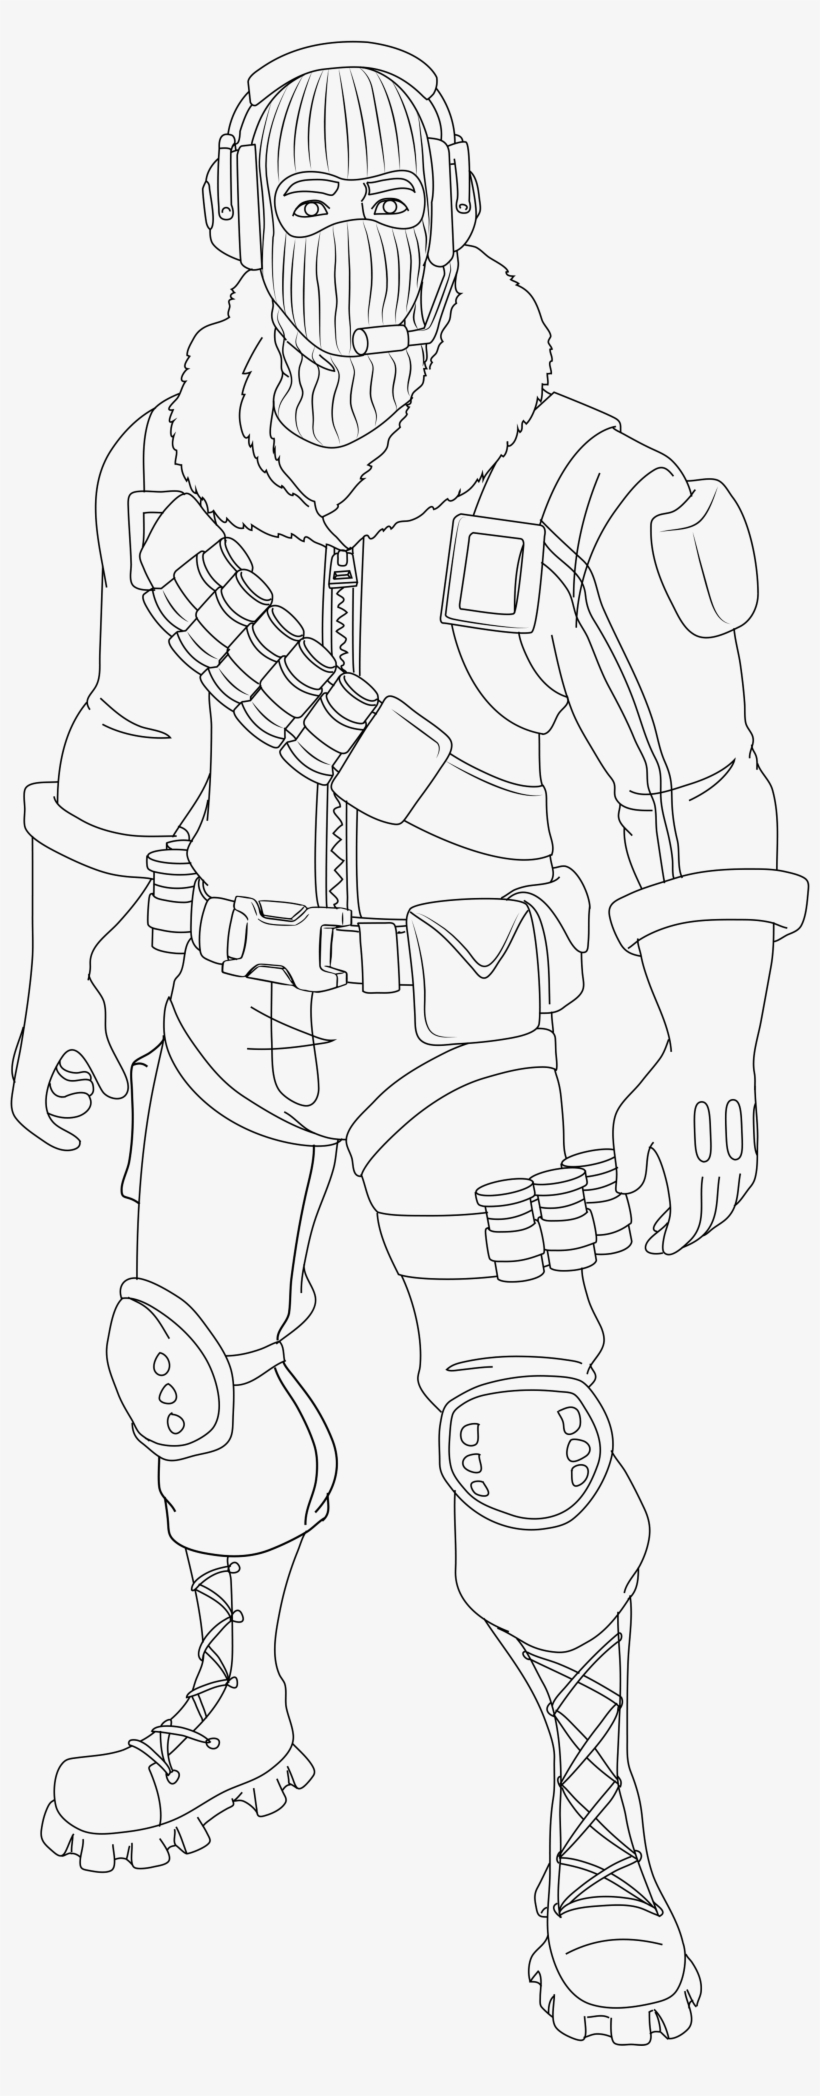 Fortnite Coloring Pages Tons Of Skins Fortnite Nexus - Zaiko Dragon Ball Af  Para Colorear PNG Image | Transparent PNG Free Download on SeekPNG